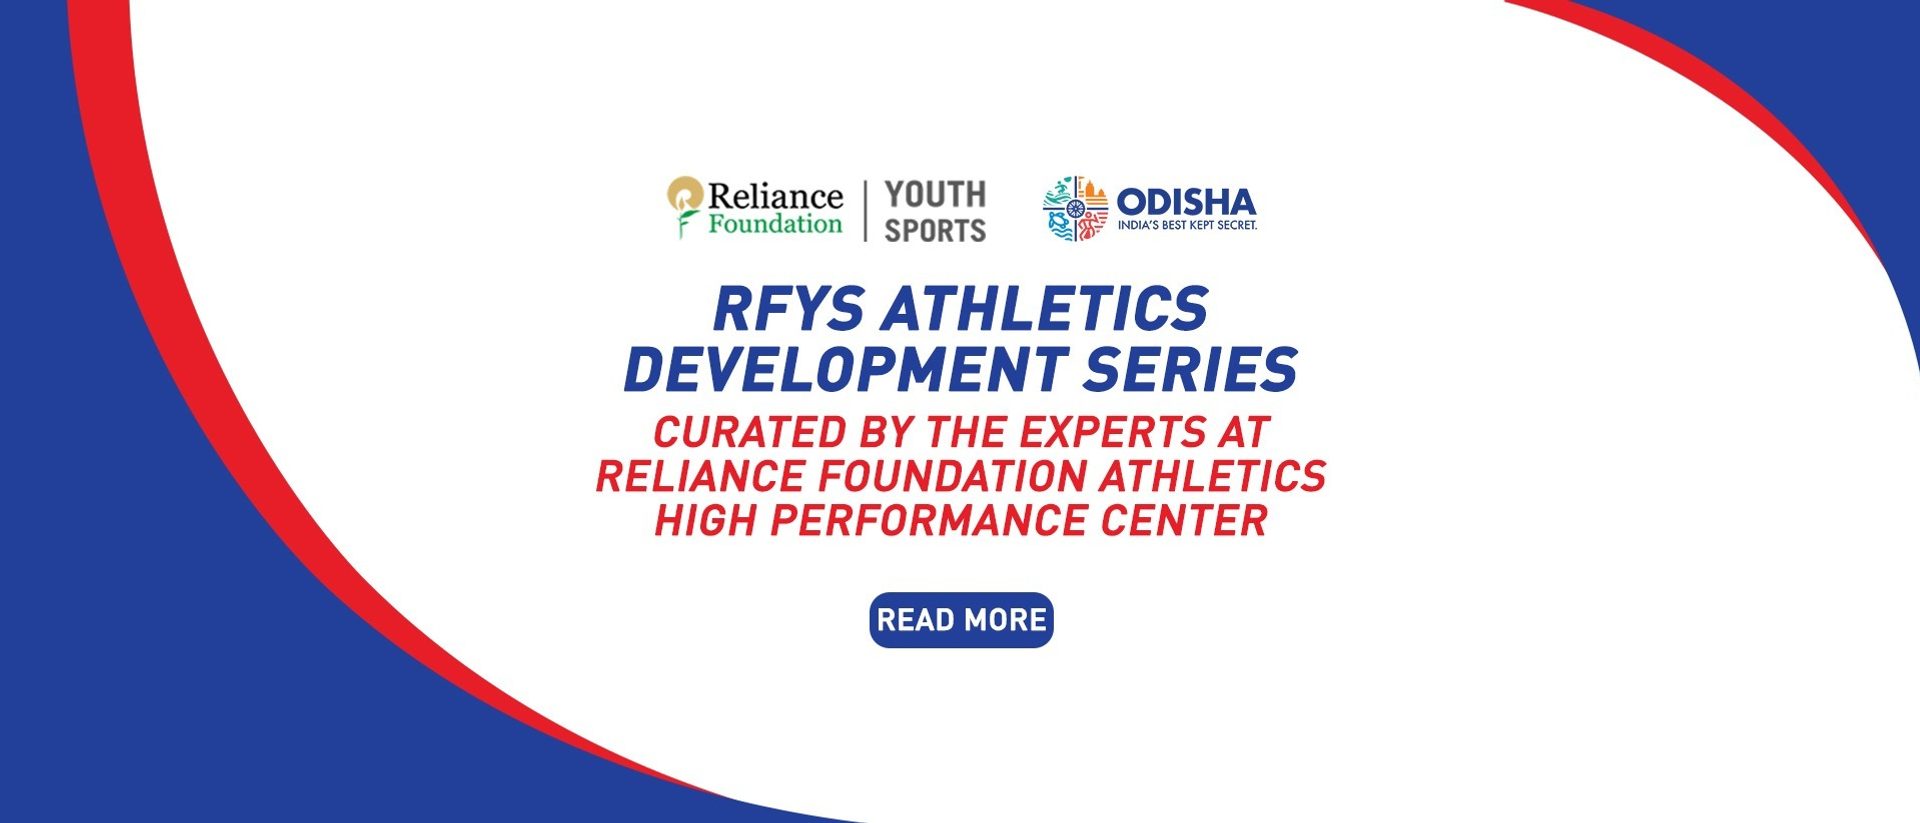 Join us in the RFYS Athletics Development Series curated by the experts at Reliance Foundation Odisha Athletics HPC